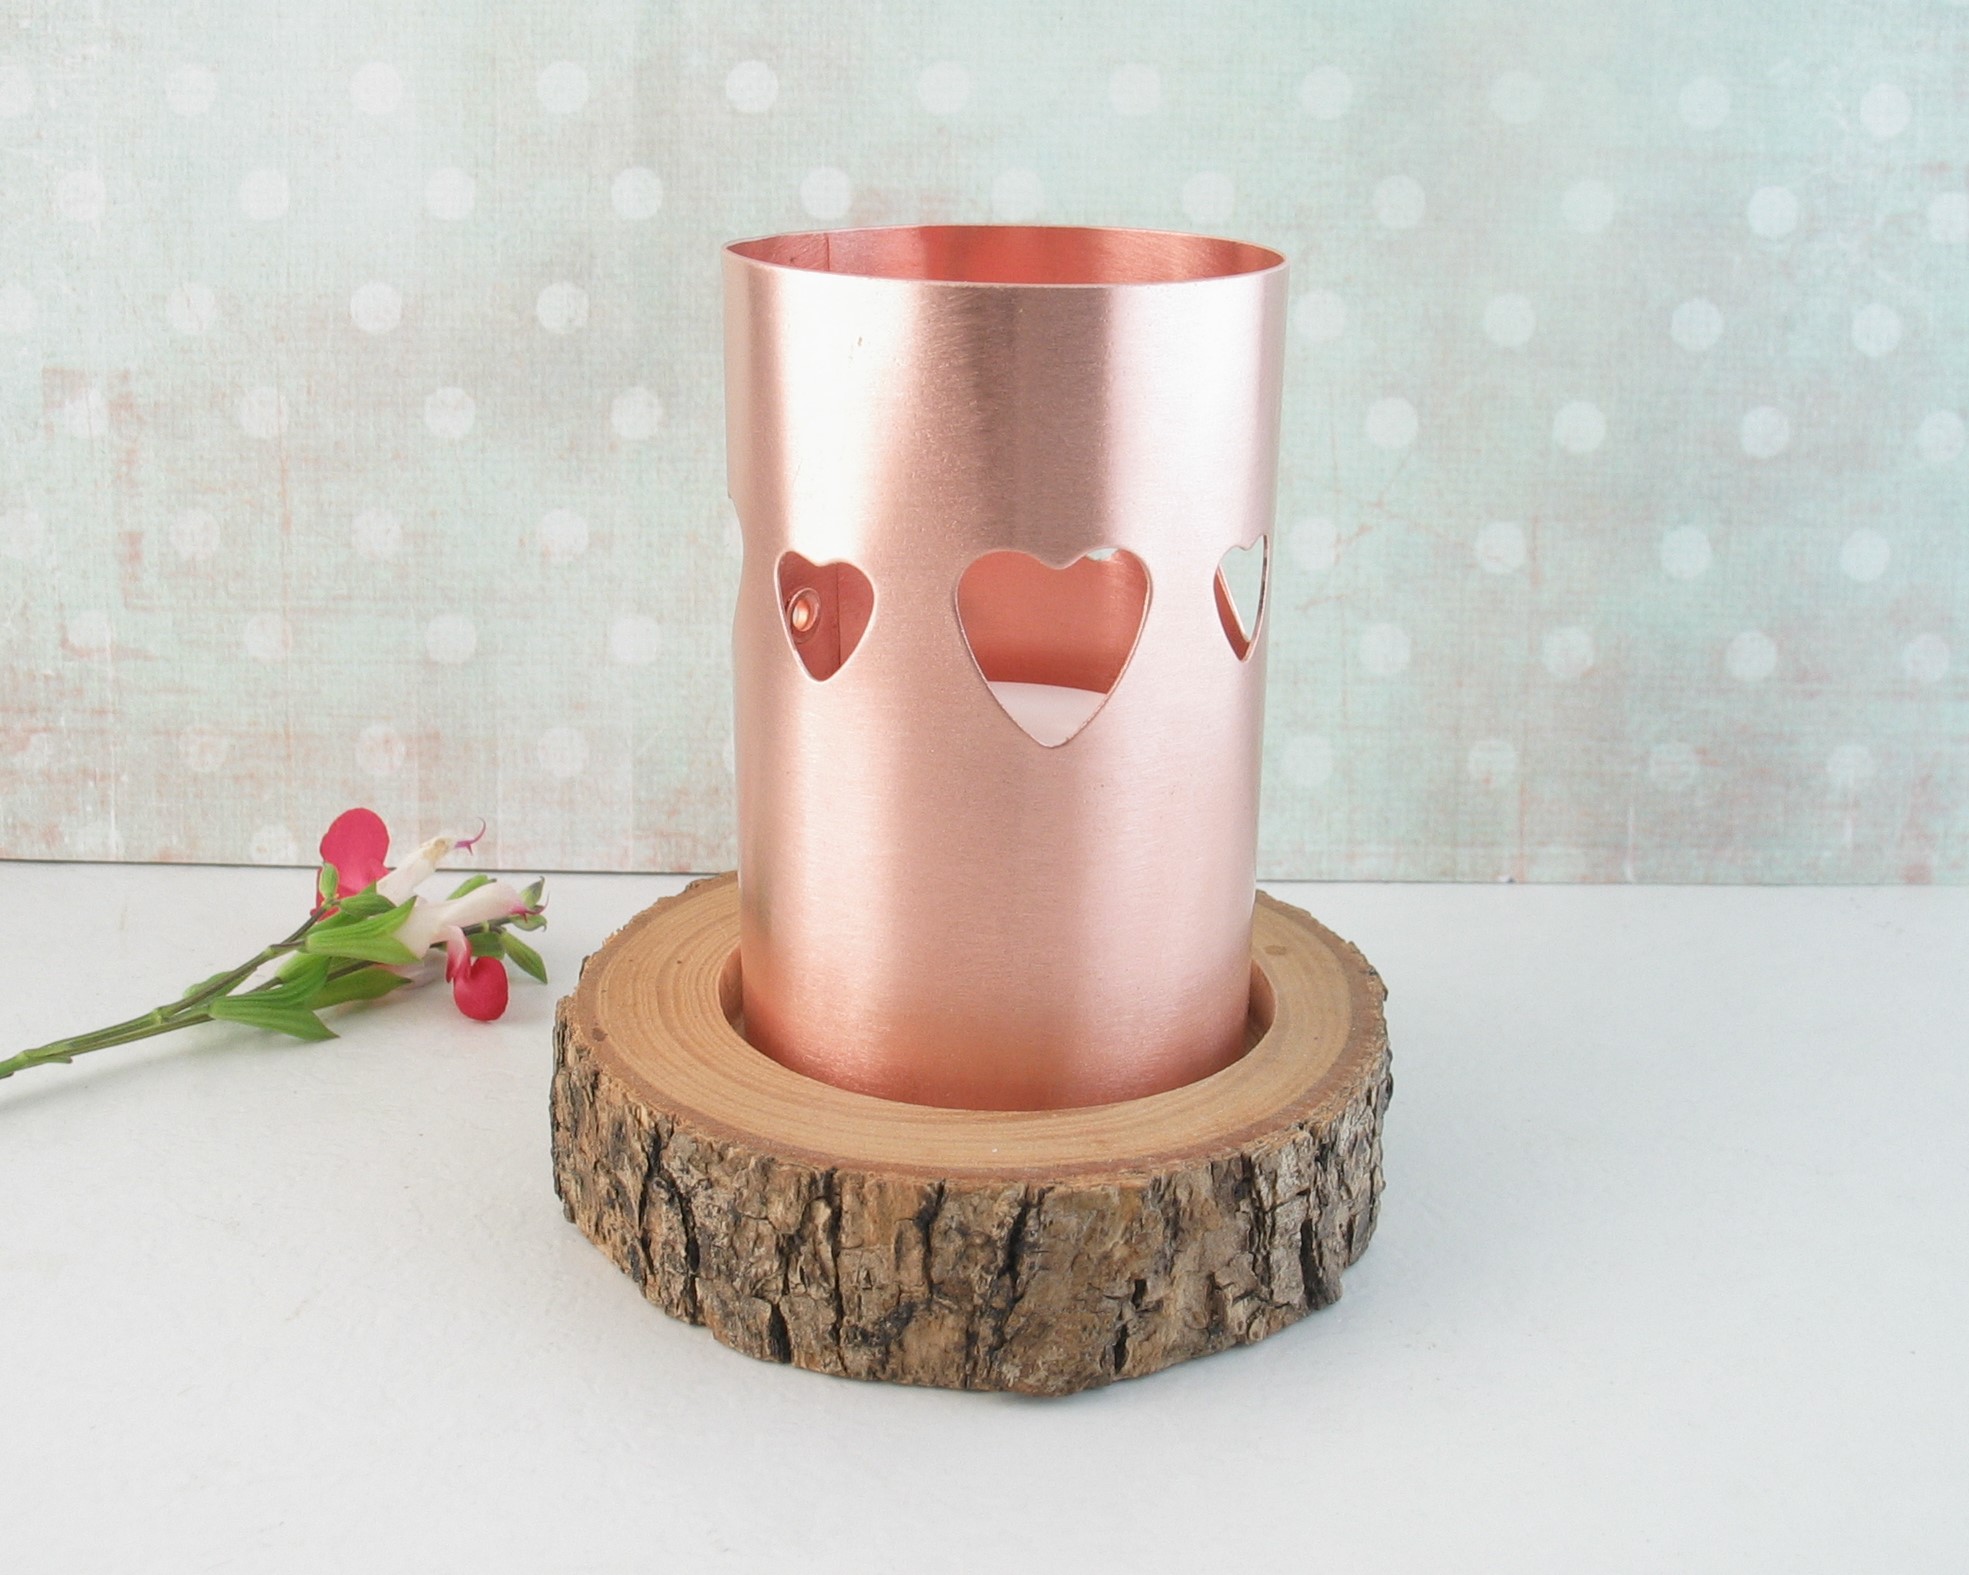 Scandanavian style heart-pierced copper chimney tea light candle holder on live-edge wooden base cut from tree limb. comes with flameless tealight candle.